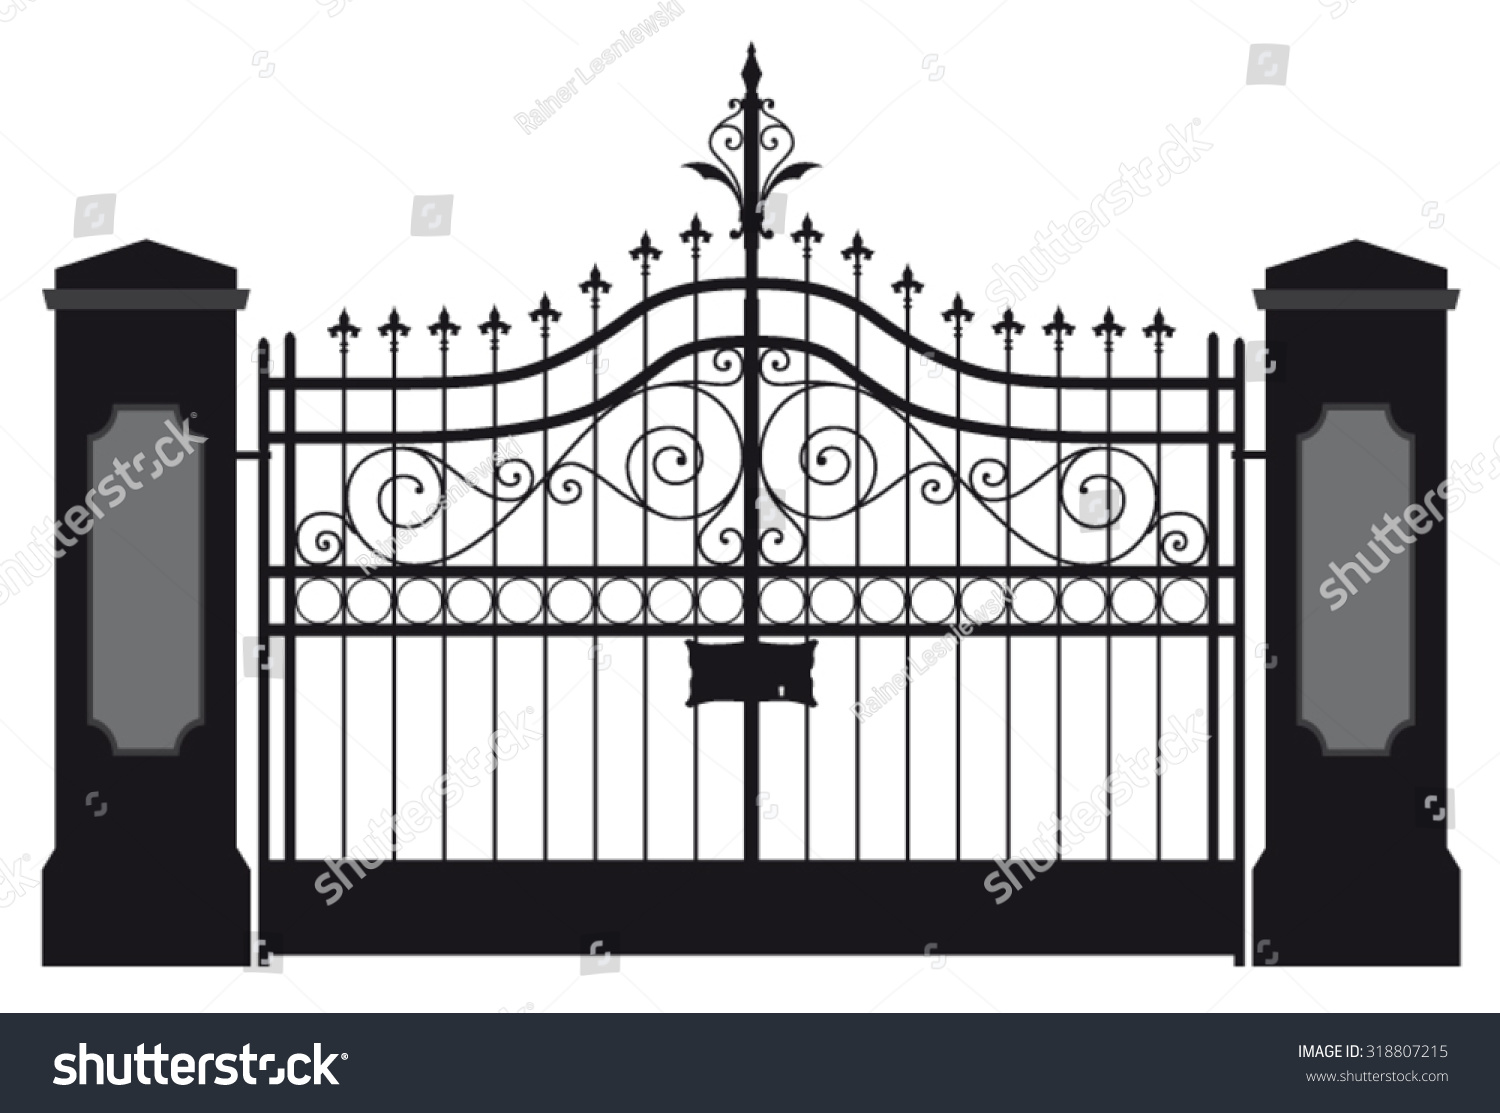 clipart of a gate - photo #22